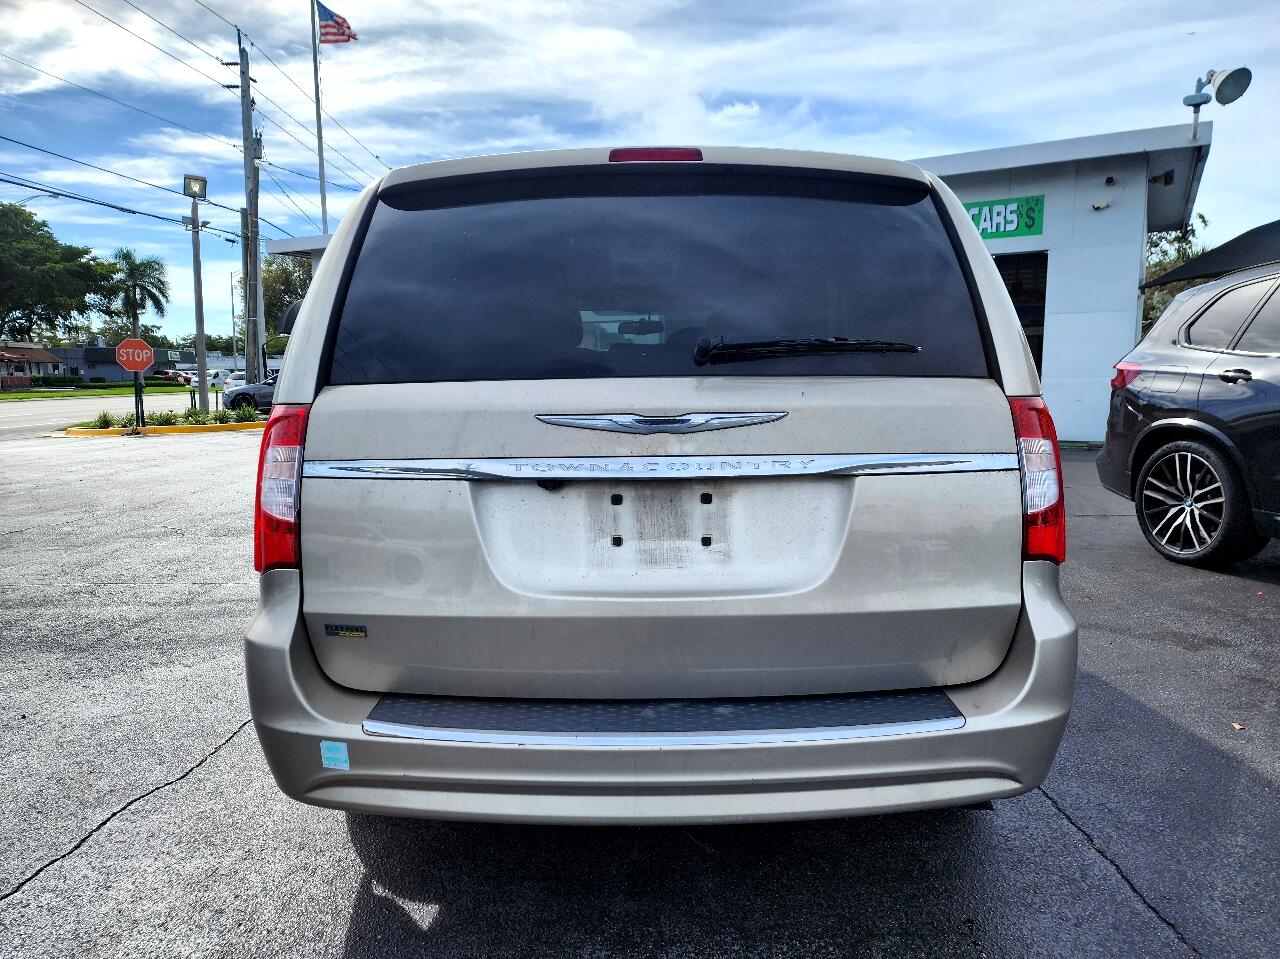 2012 CHRYSLER Town and Country Minivan - $2,500